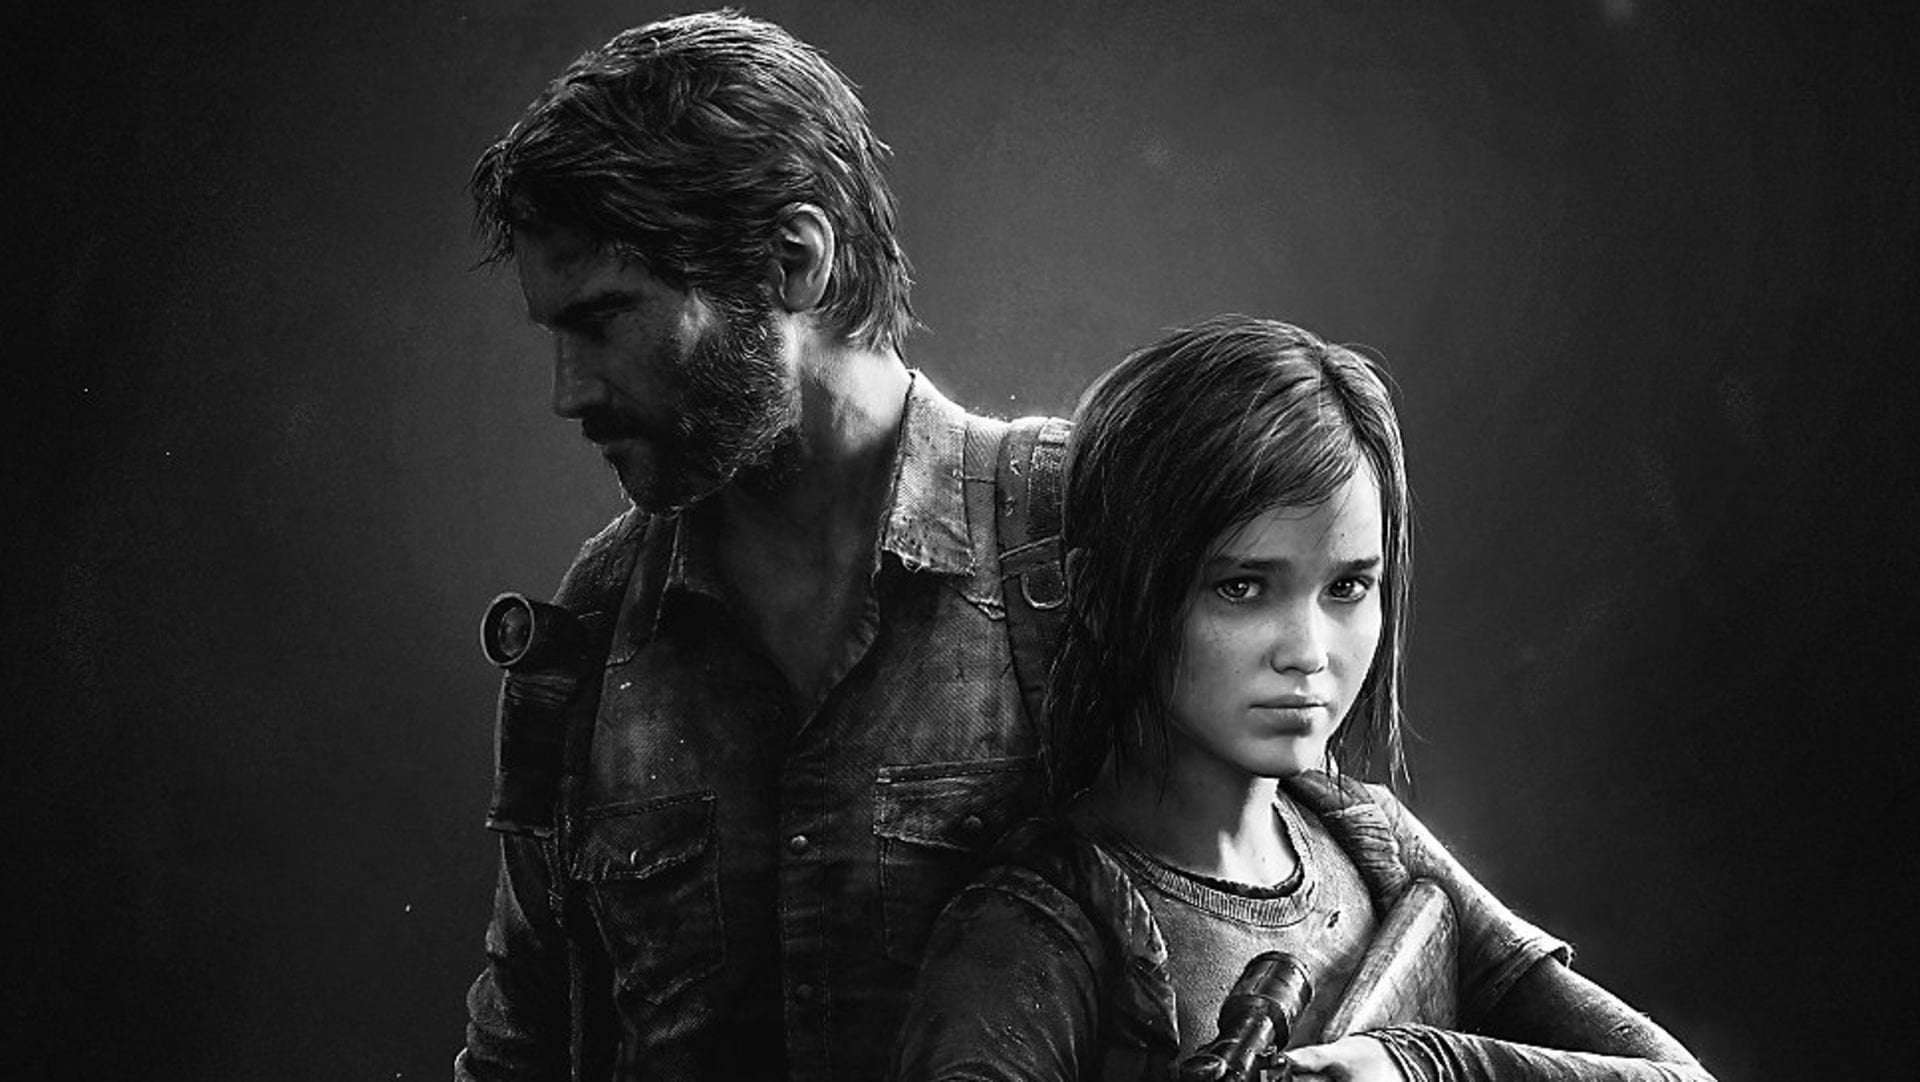 image for Naughty Dog’s Next Game Is Reportedly The Last of Us Part 3